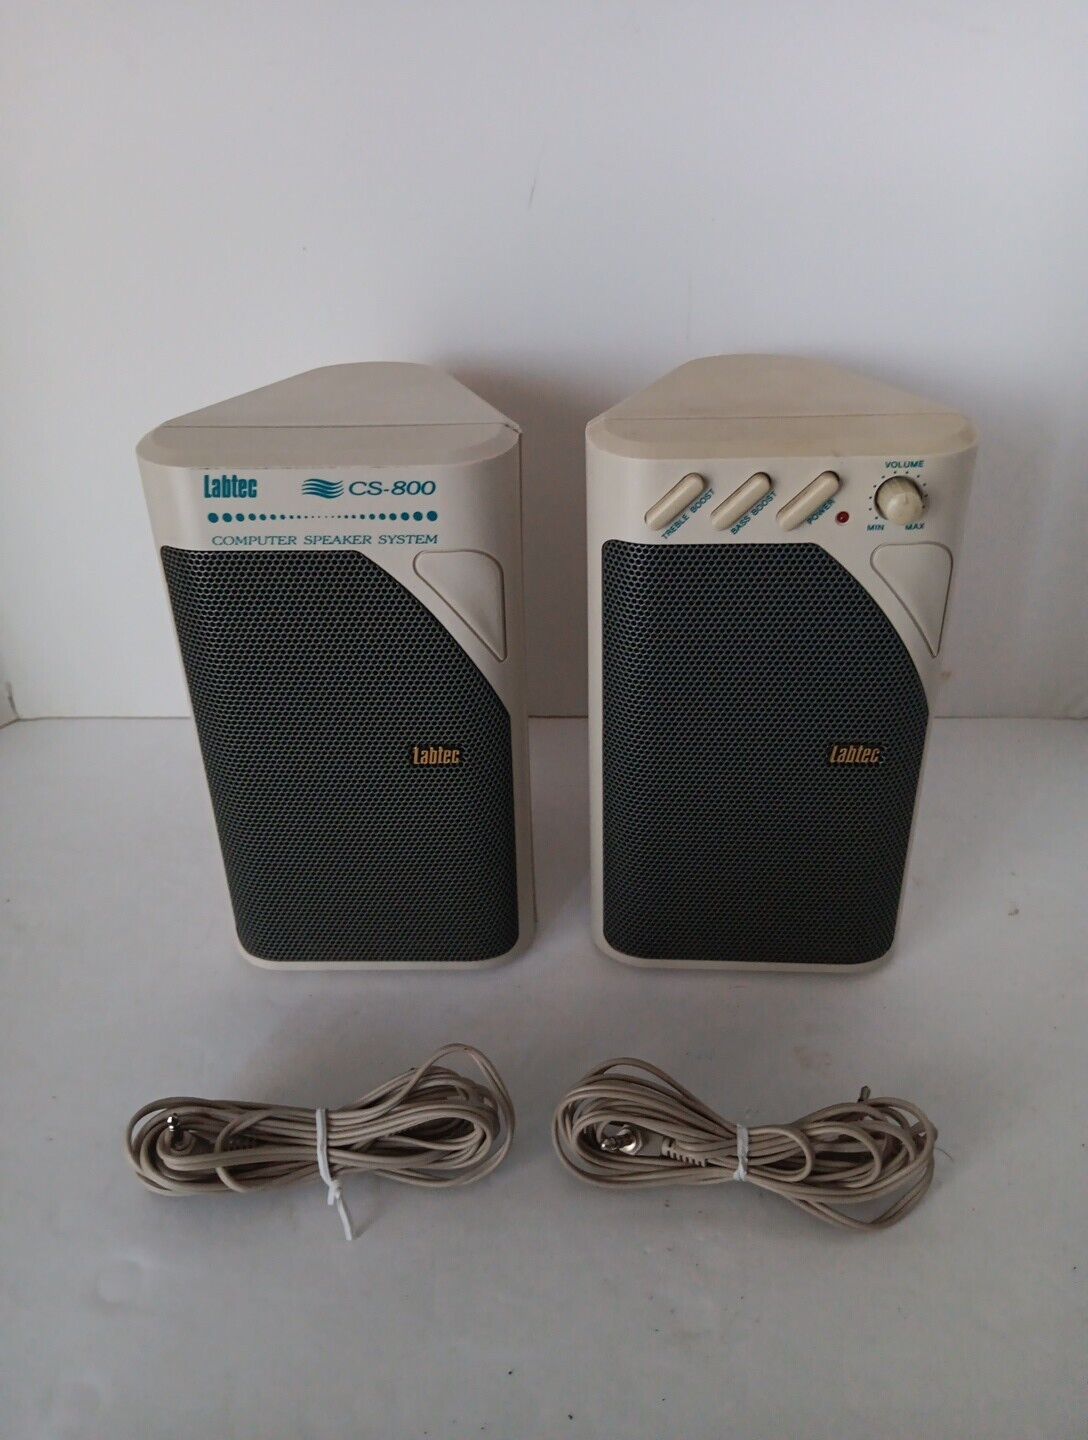 LABTEC CS-800 Amplified Computer PC Speakers System 2 Piece w/wires parts repair